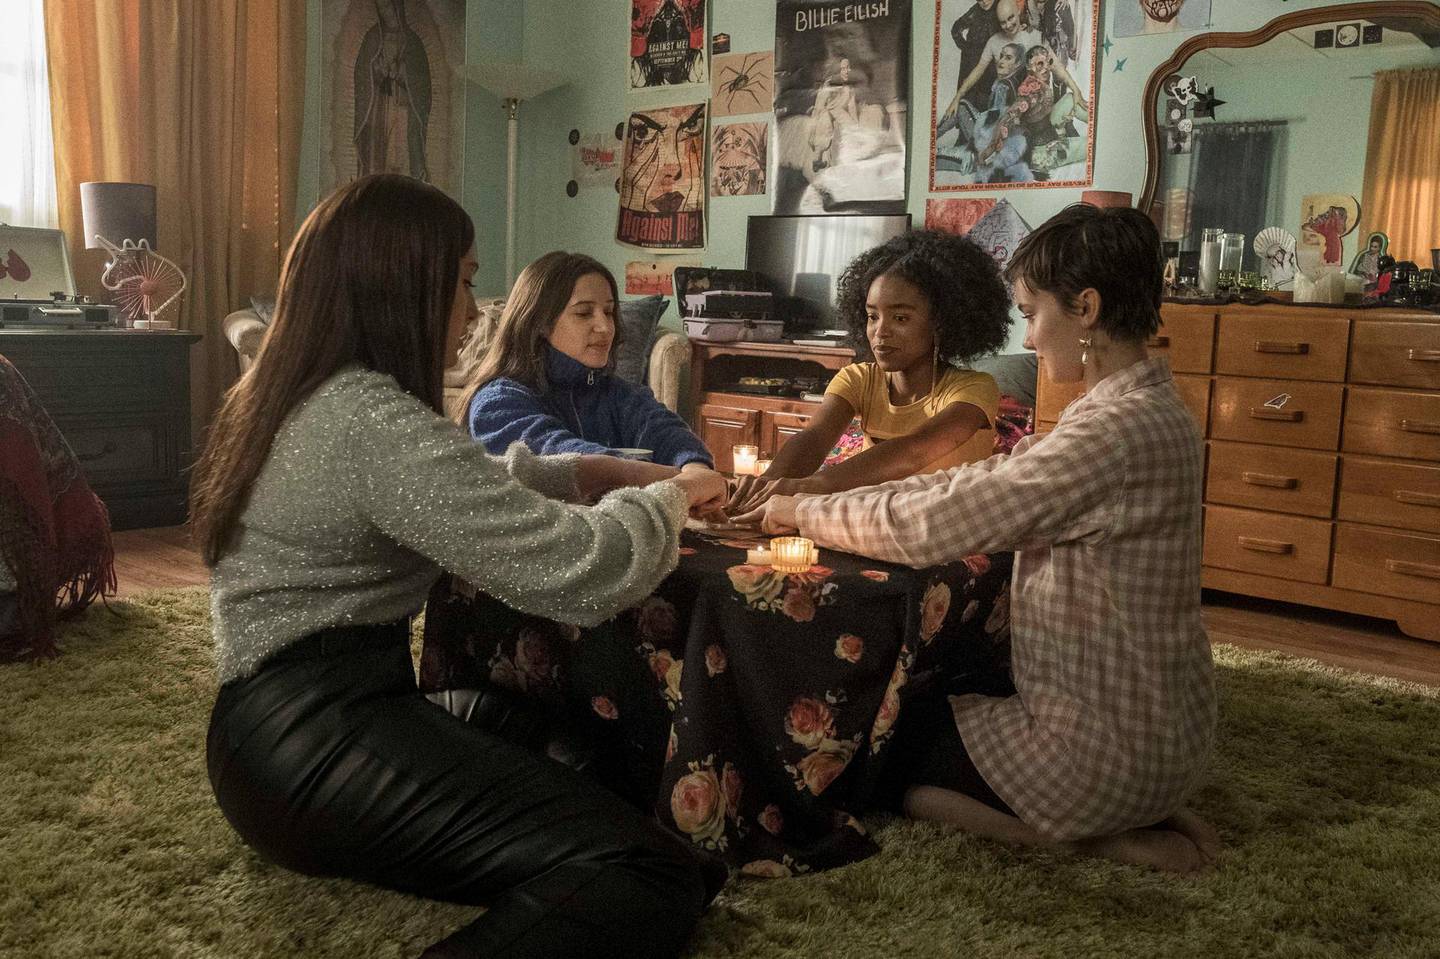 (l-r) Lourdes (Zoey Luna)  Frankie (Gideon Adlon)  Tabby (Lovie Simone) and Lily (Cailee Spaeny) perform rituals and talk about being cautious with their gifts in Columbia Pictures' THE CRAFT: LEGACY. Courtesy Sony Pictures